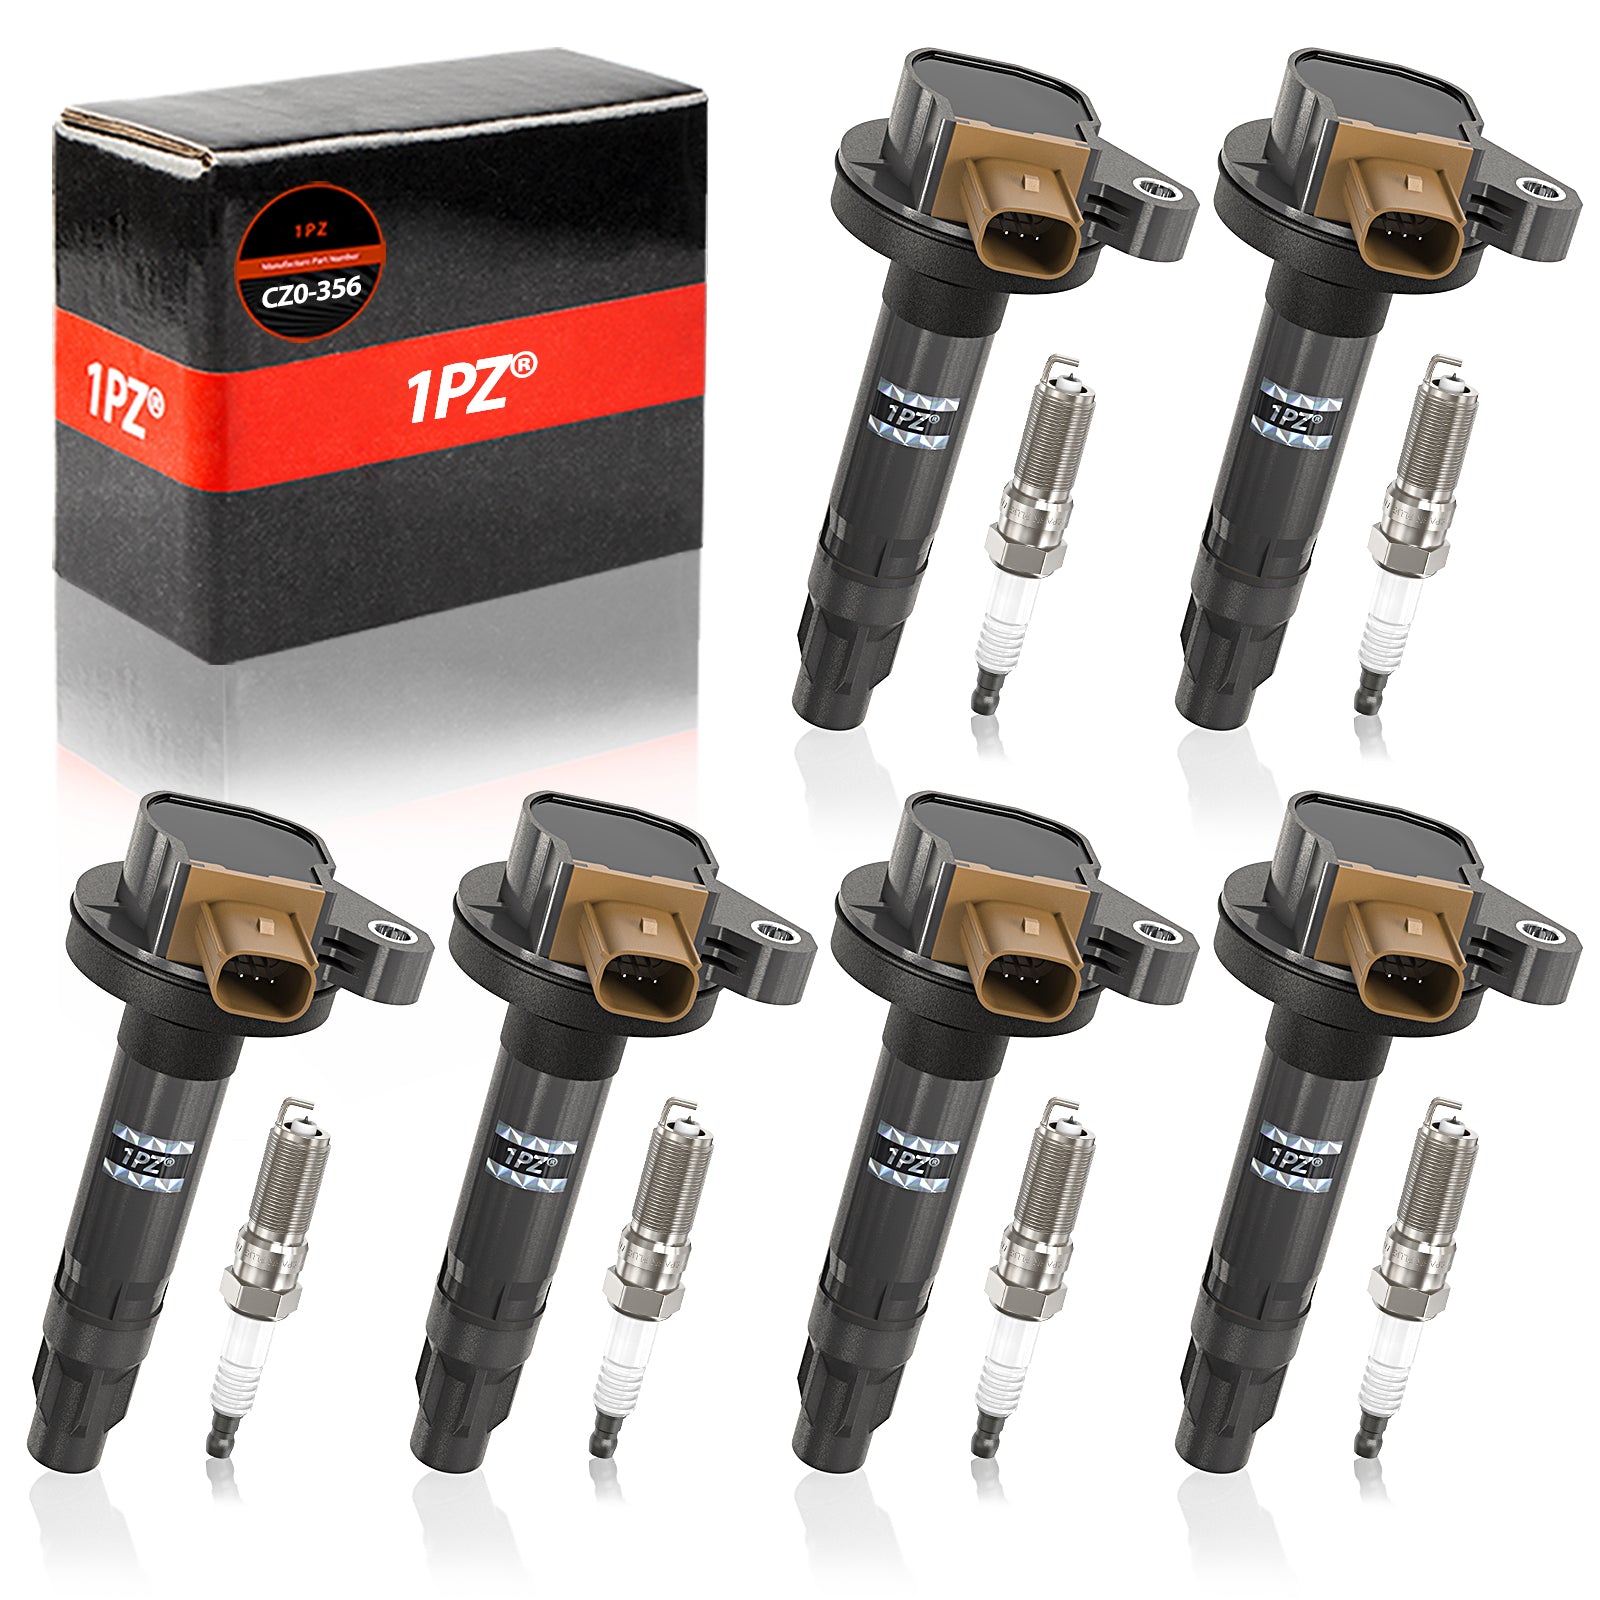 1PZ Set of 6 Ignition Coil Pack and Iridium Spark Plugs UF646 Compatible with Ford Lincoln F-150 Explorer Expedition Flex Police Interceptor Transit 150 250 350 MKS MKT Navigator 3.5L